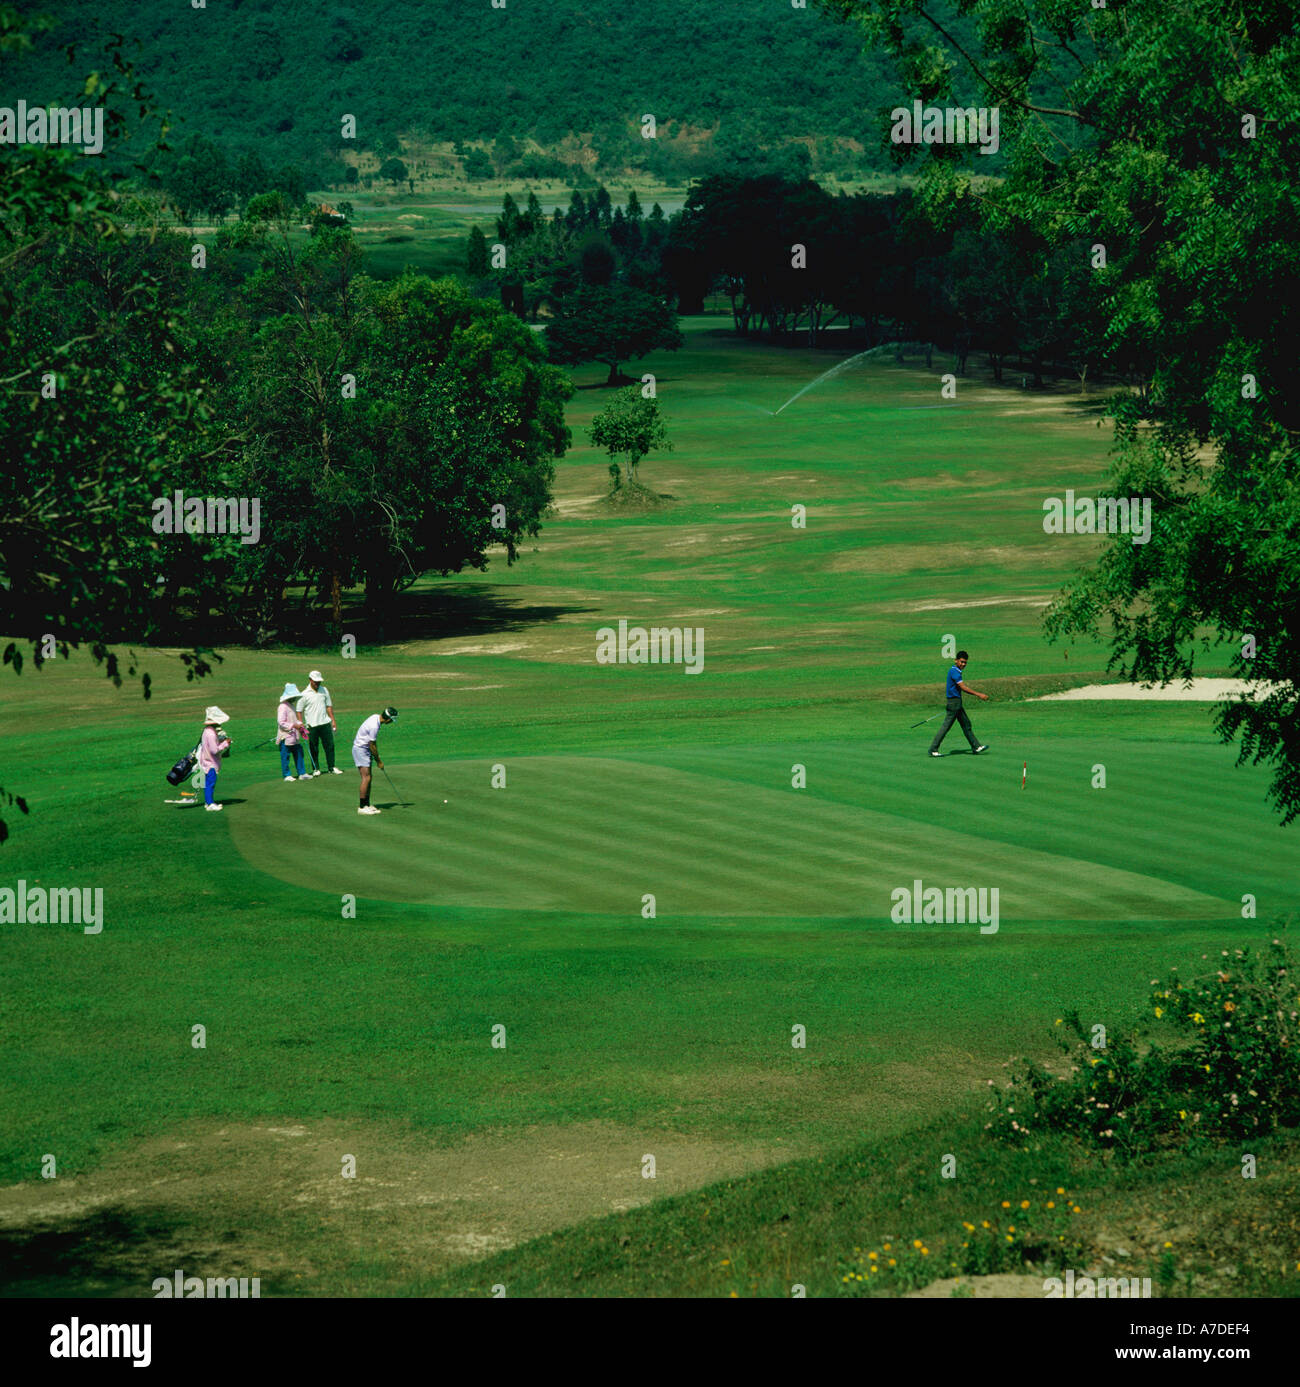 Golf in play on green with players and caddies at Plutaluang Royal Thai Navy Golf Course, Pattaya, Thailand Stock Photo